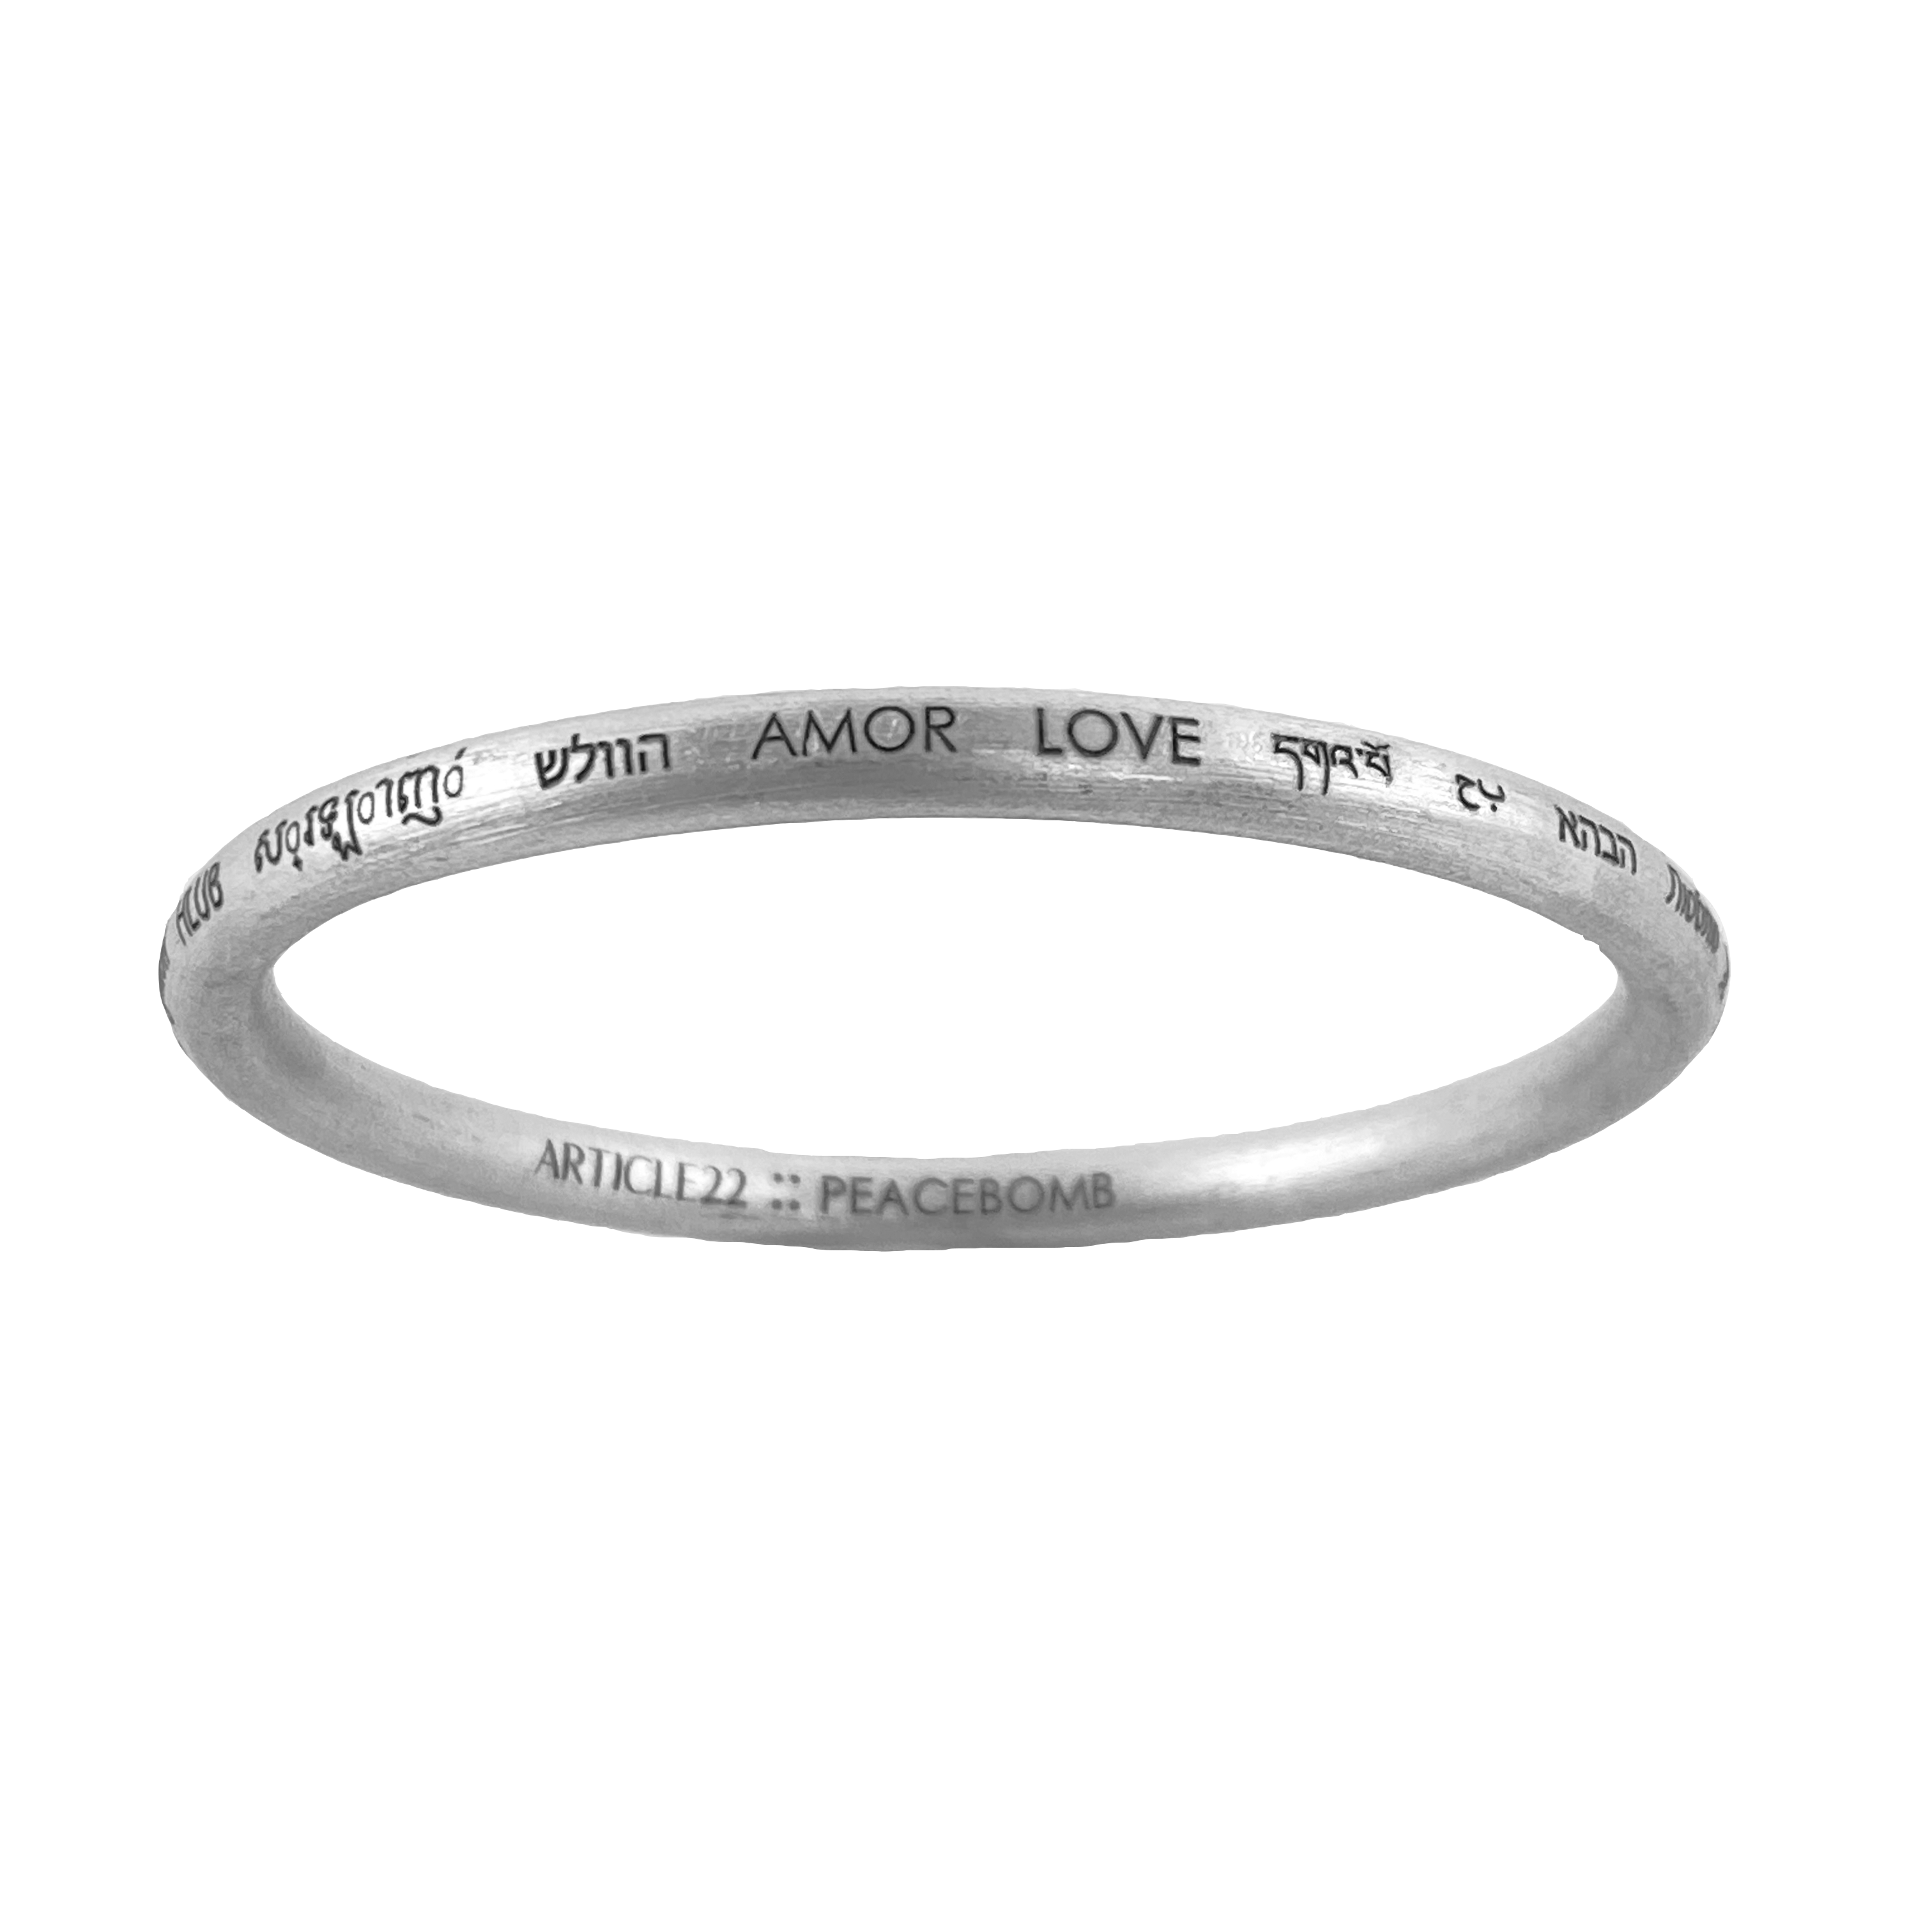 ARTICLE22 Love All Around Bangle - A Symbol of Universal Love and Empowerment